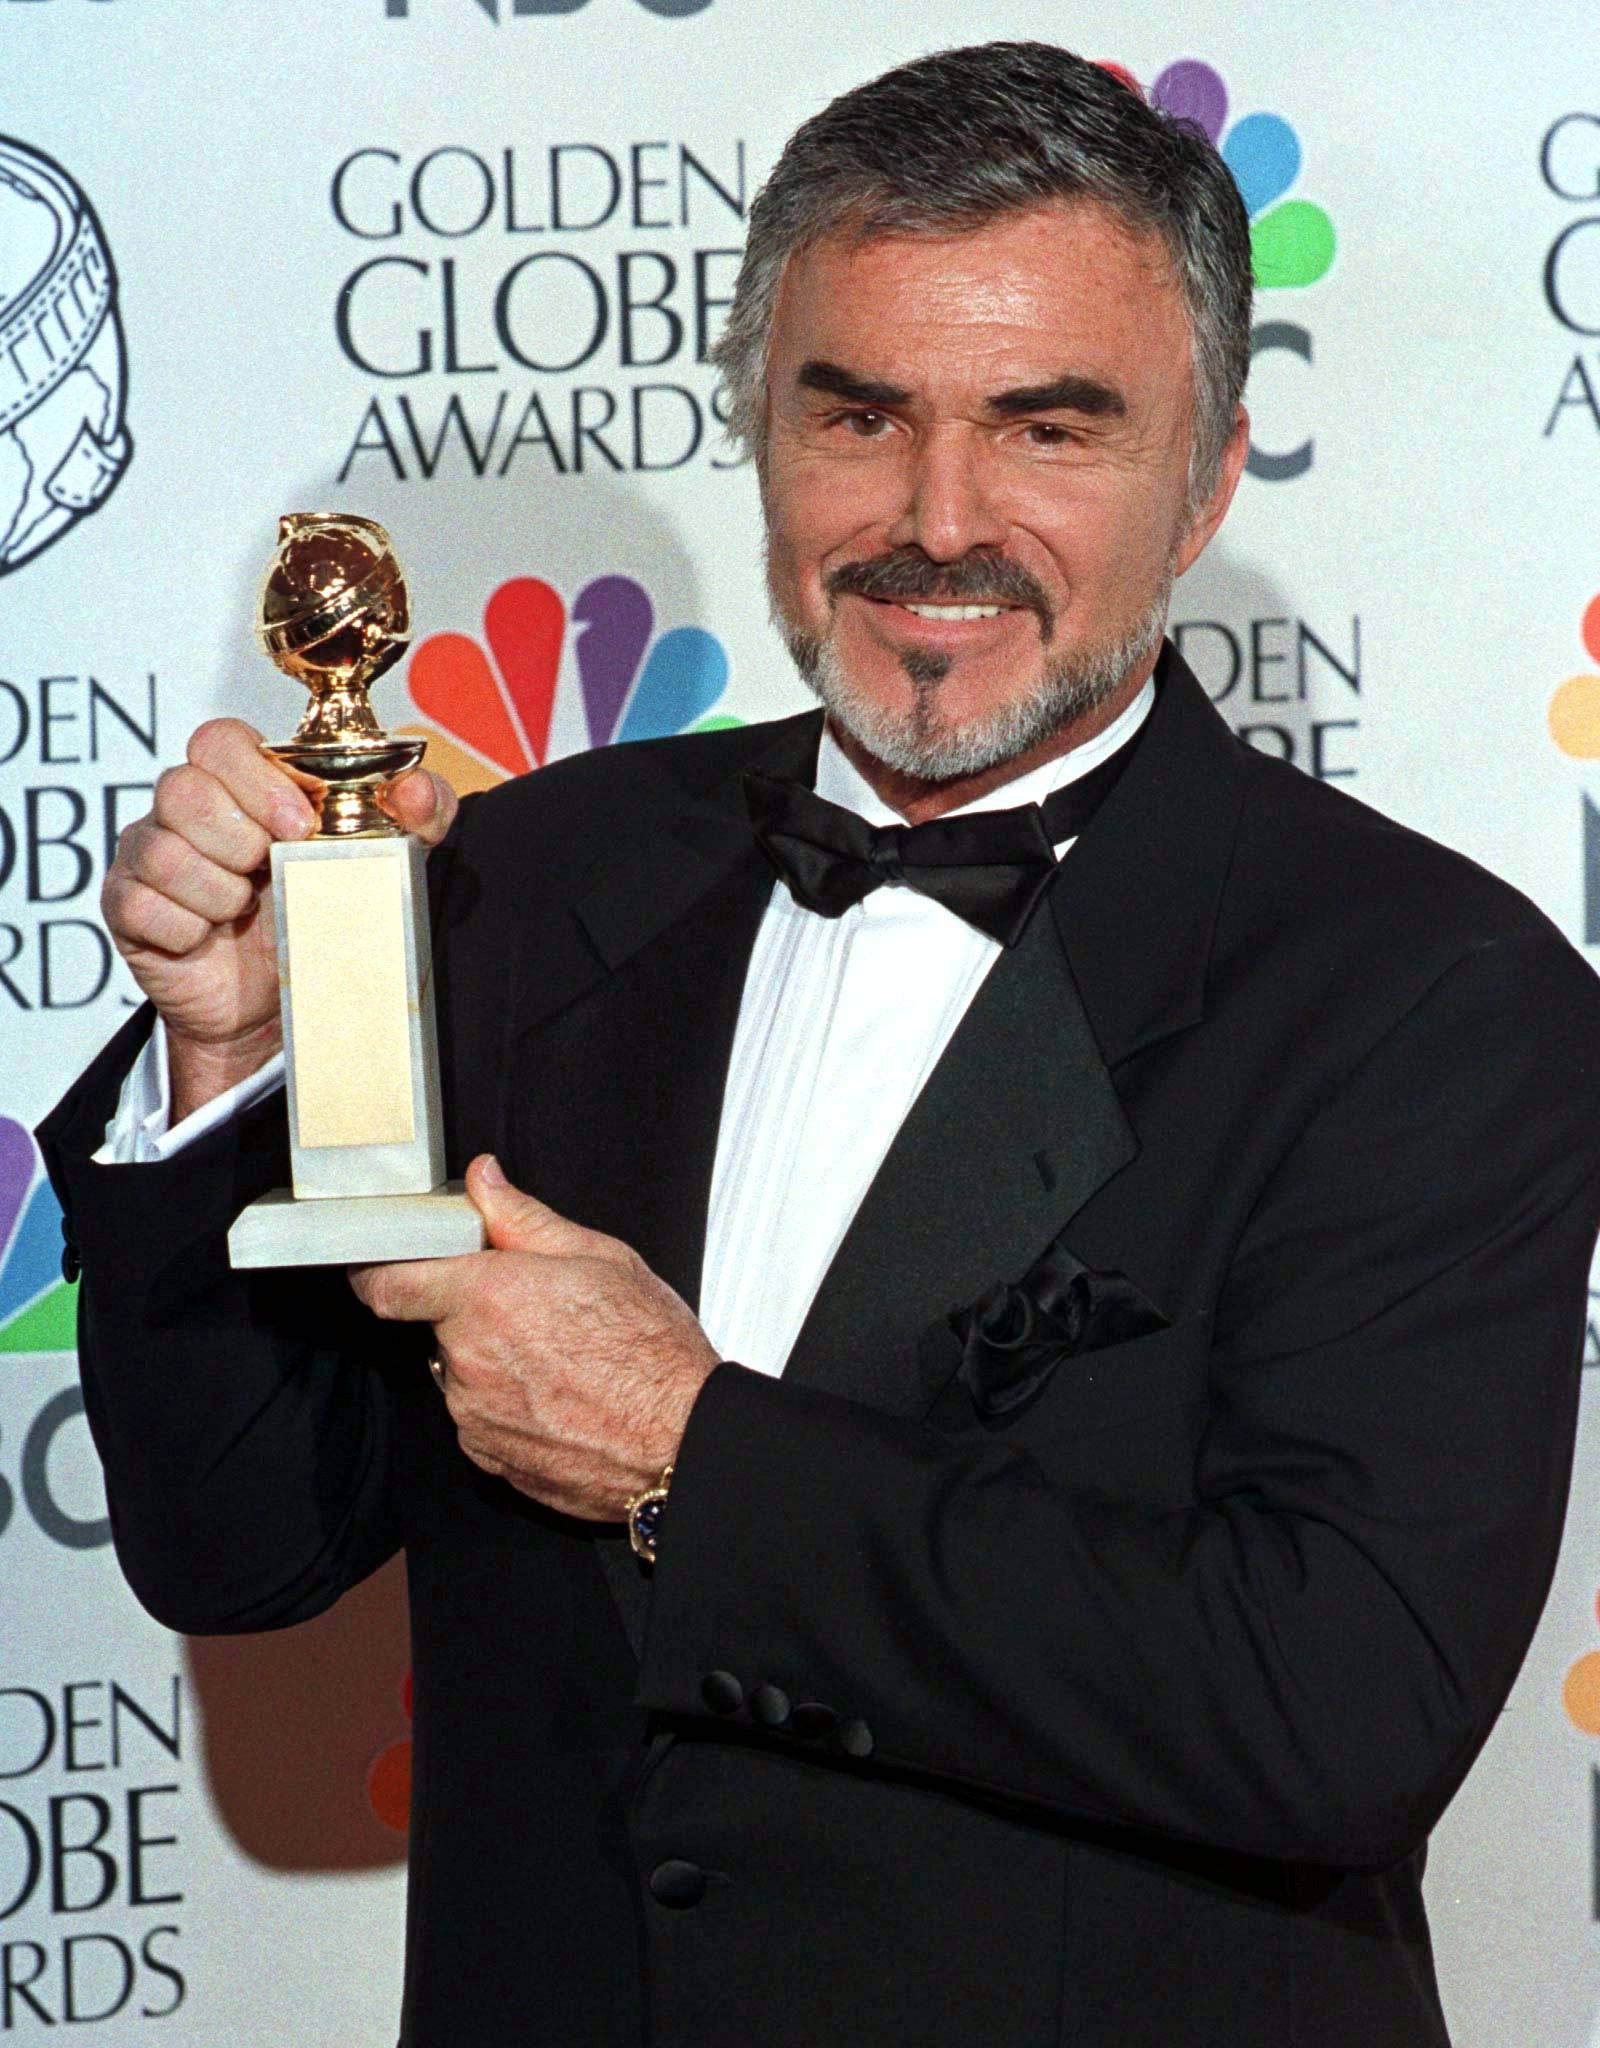 FILE PHOTO: Burt Reynolds holds his Golden Globe award won for best supporting actor in a motion picture for "Boogie Nights" at the 55th annual Goden Globe Awards in Beverly Hills